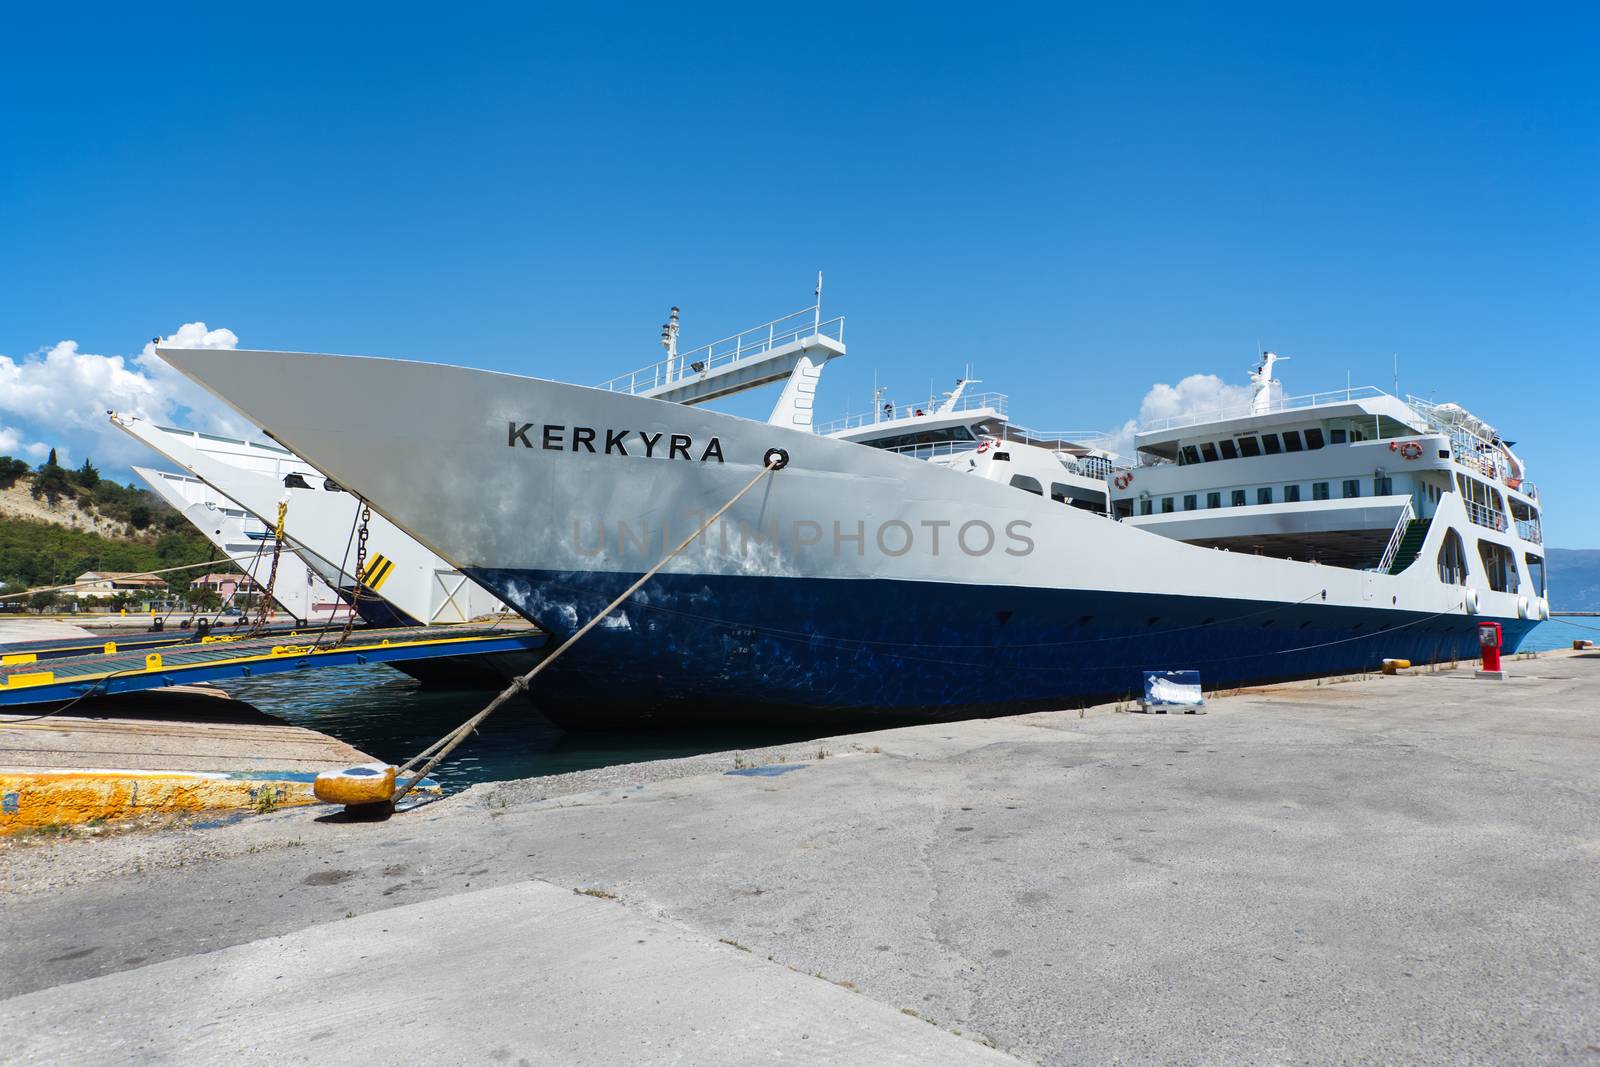 A large greek ferry on the coast of Corfu. The ferry transports thousands passengers and vehicle daily